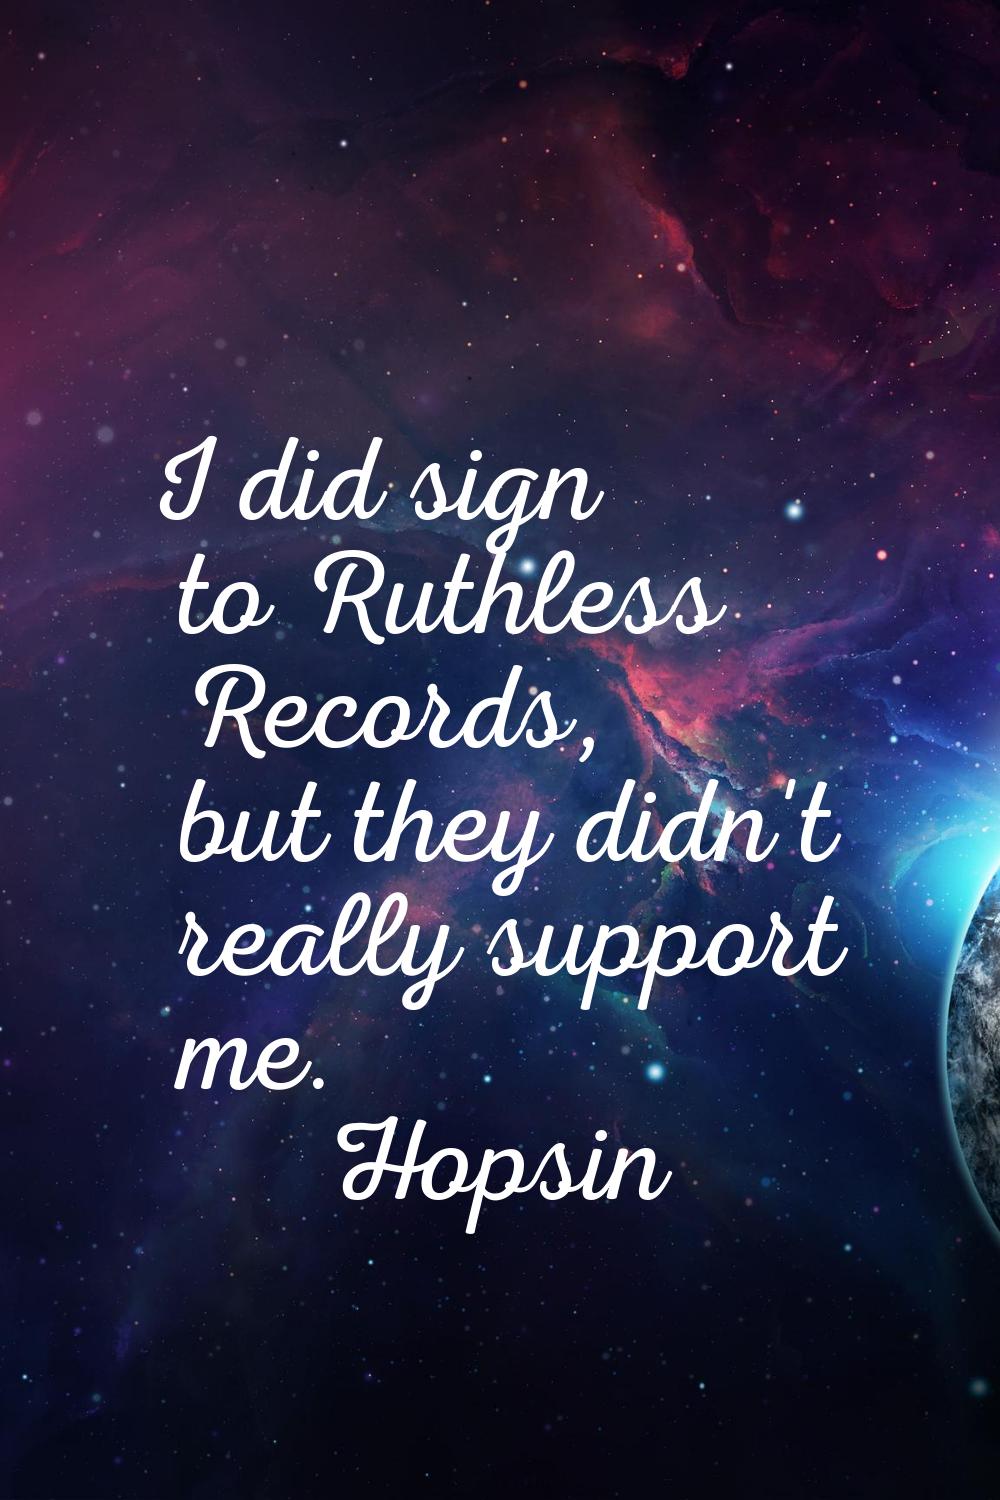 I did sign to Ruthless Records, but they didn't really support me.